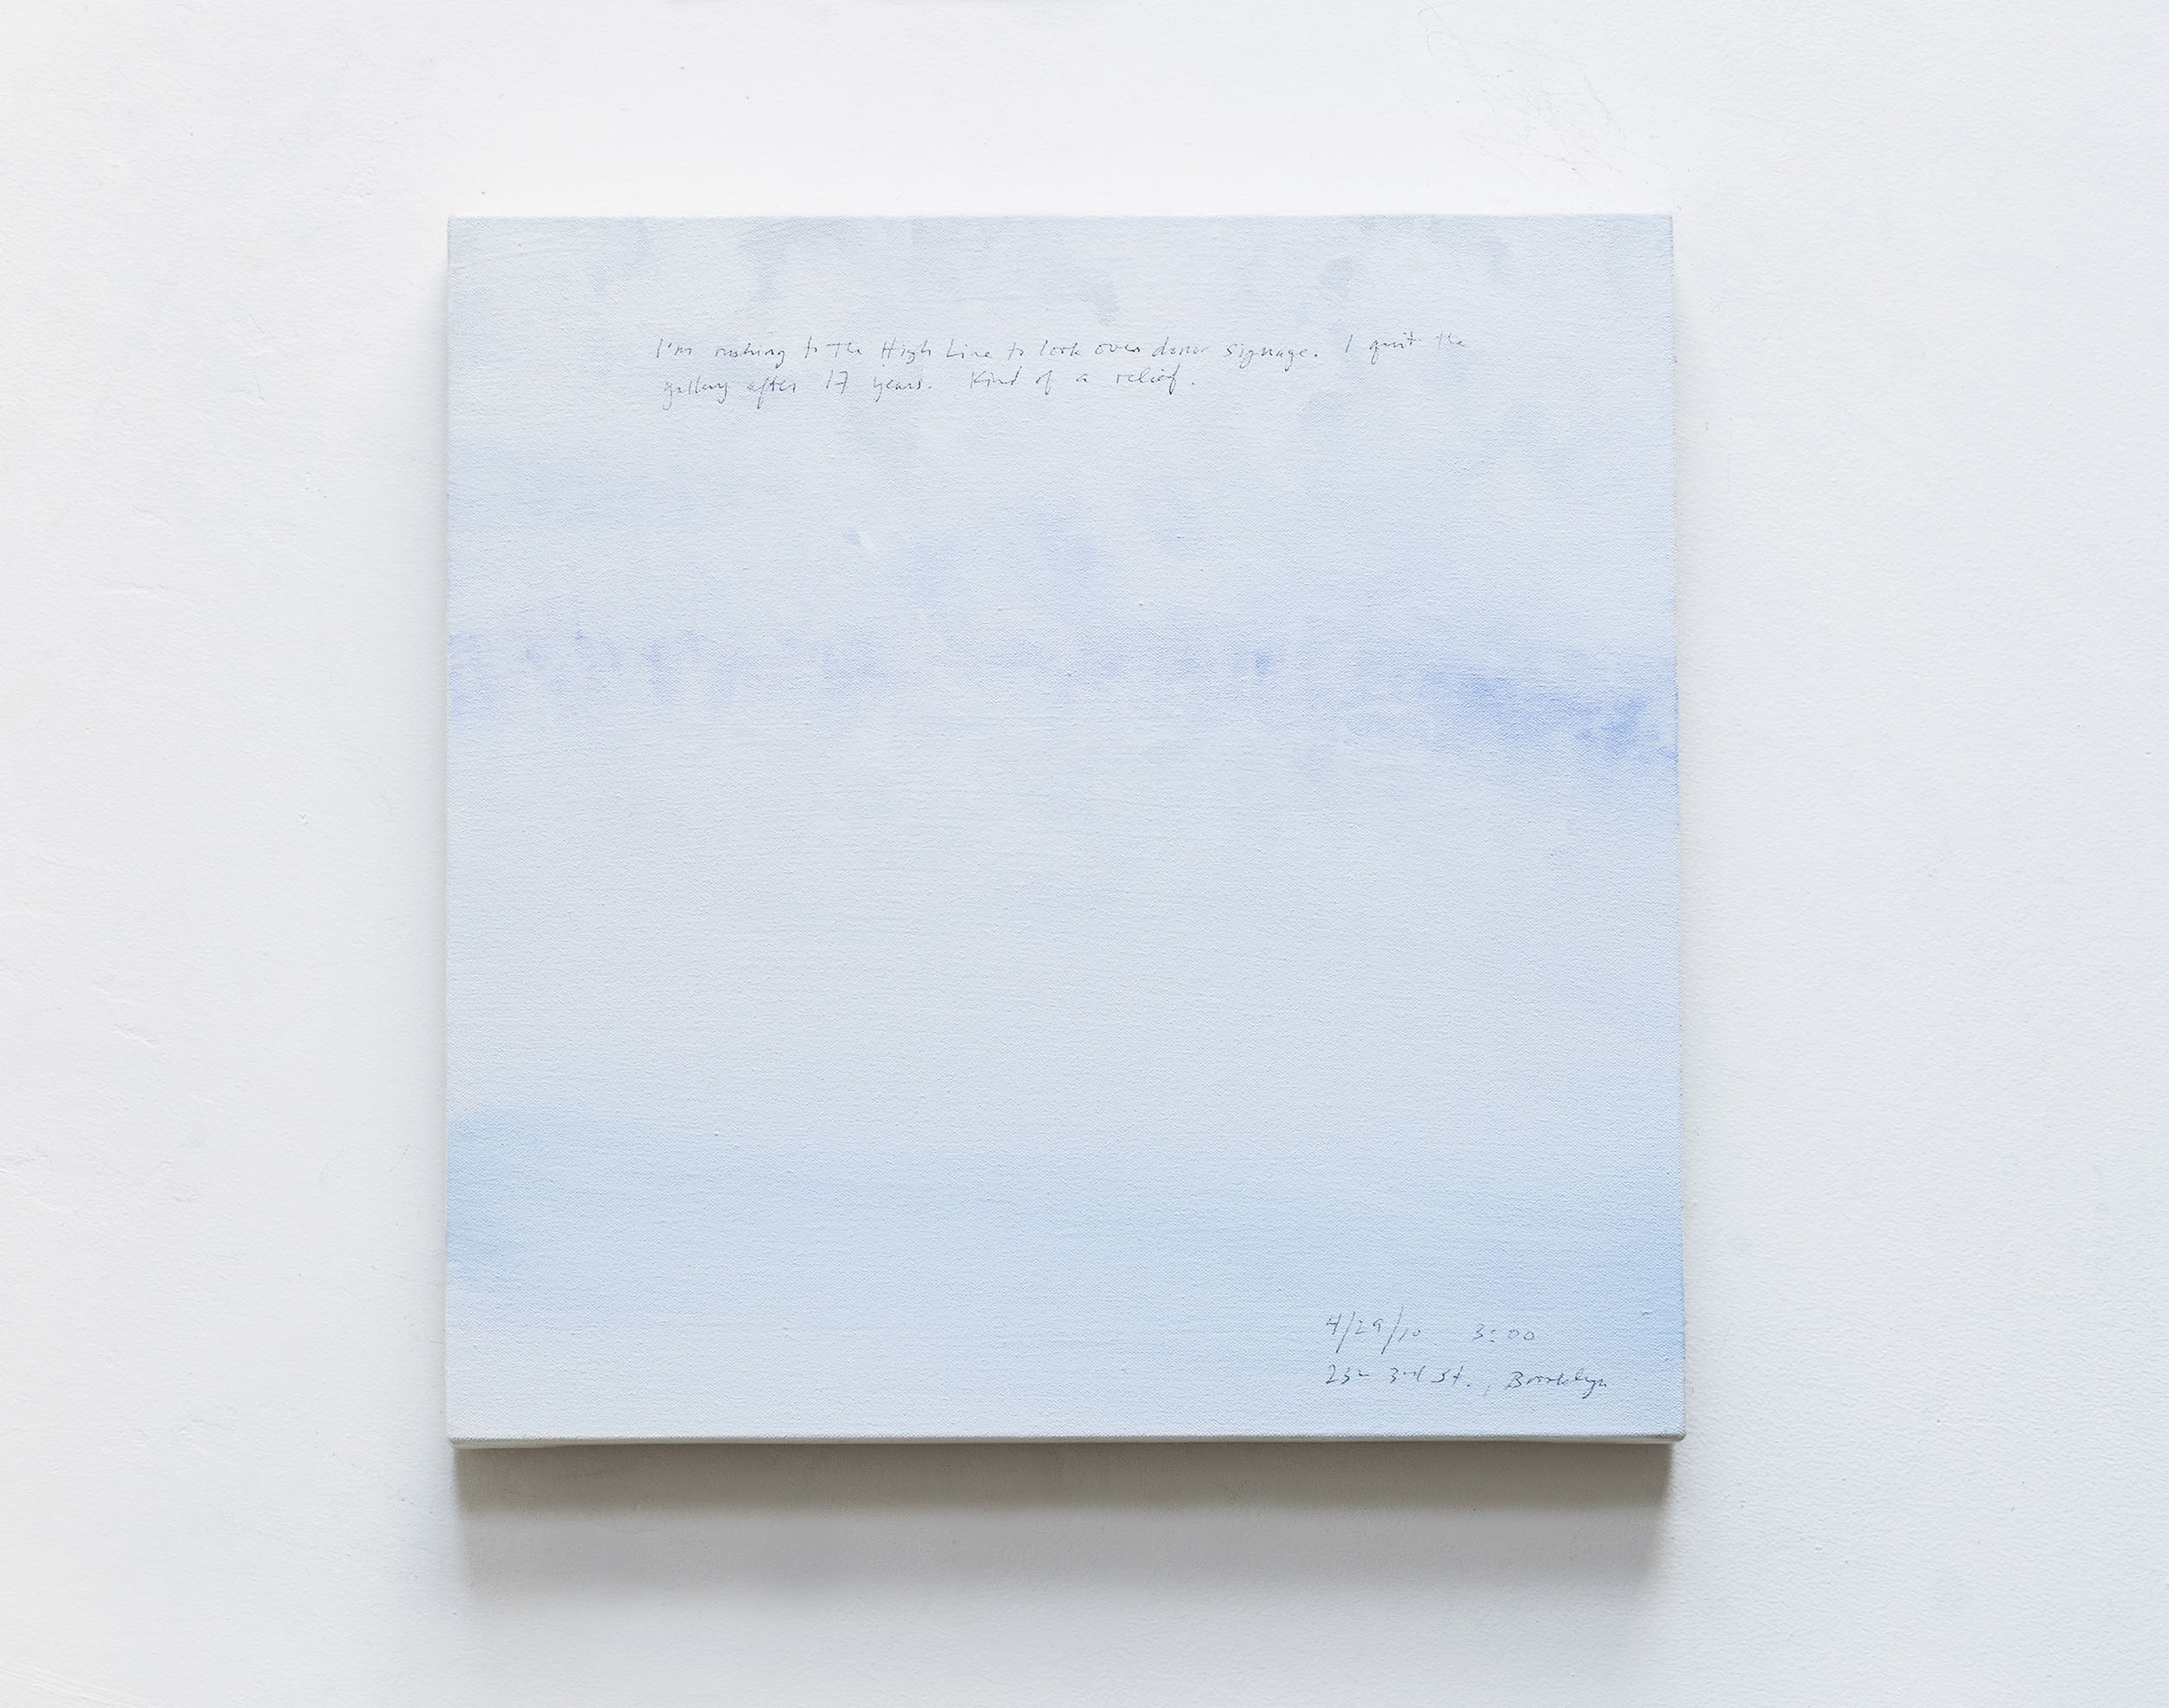 A 14 × 14 inch, acrylic painting of the sky. A journal entry is handwritten on the painting:

“I’m rushing to the High Line to look over donor signage. I quit the gallery after 17 years. Kind of a relief.

4/29/10 3:00
232 3rd St., Brooklyn”